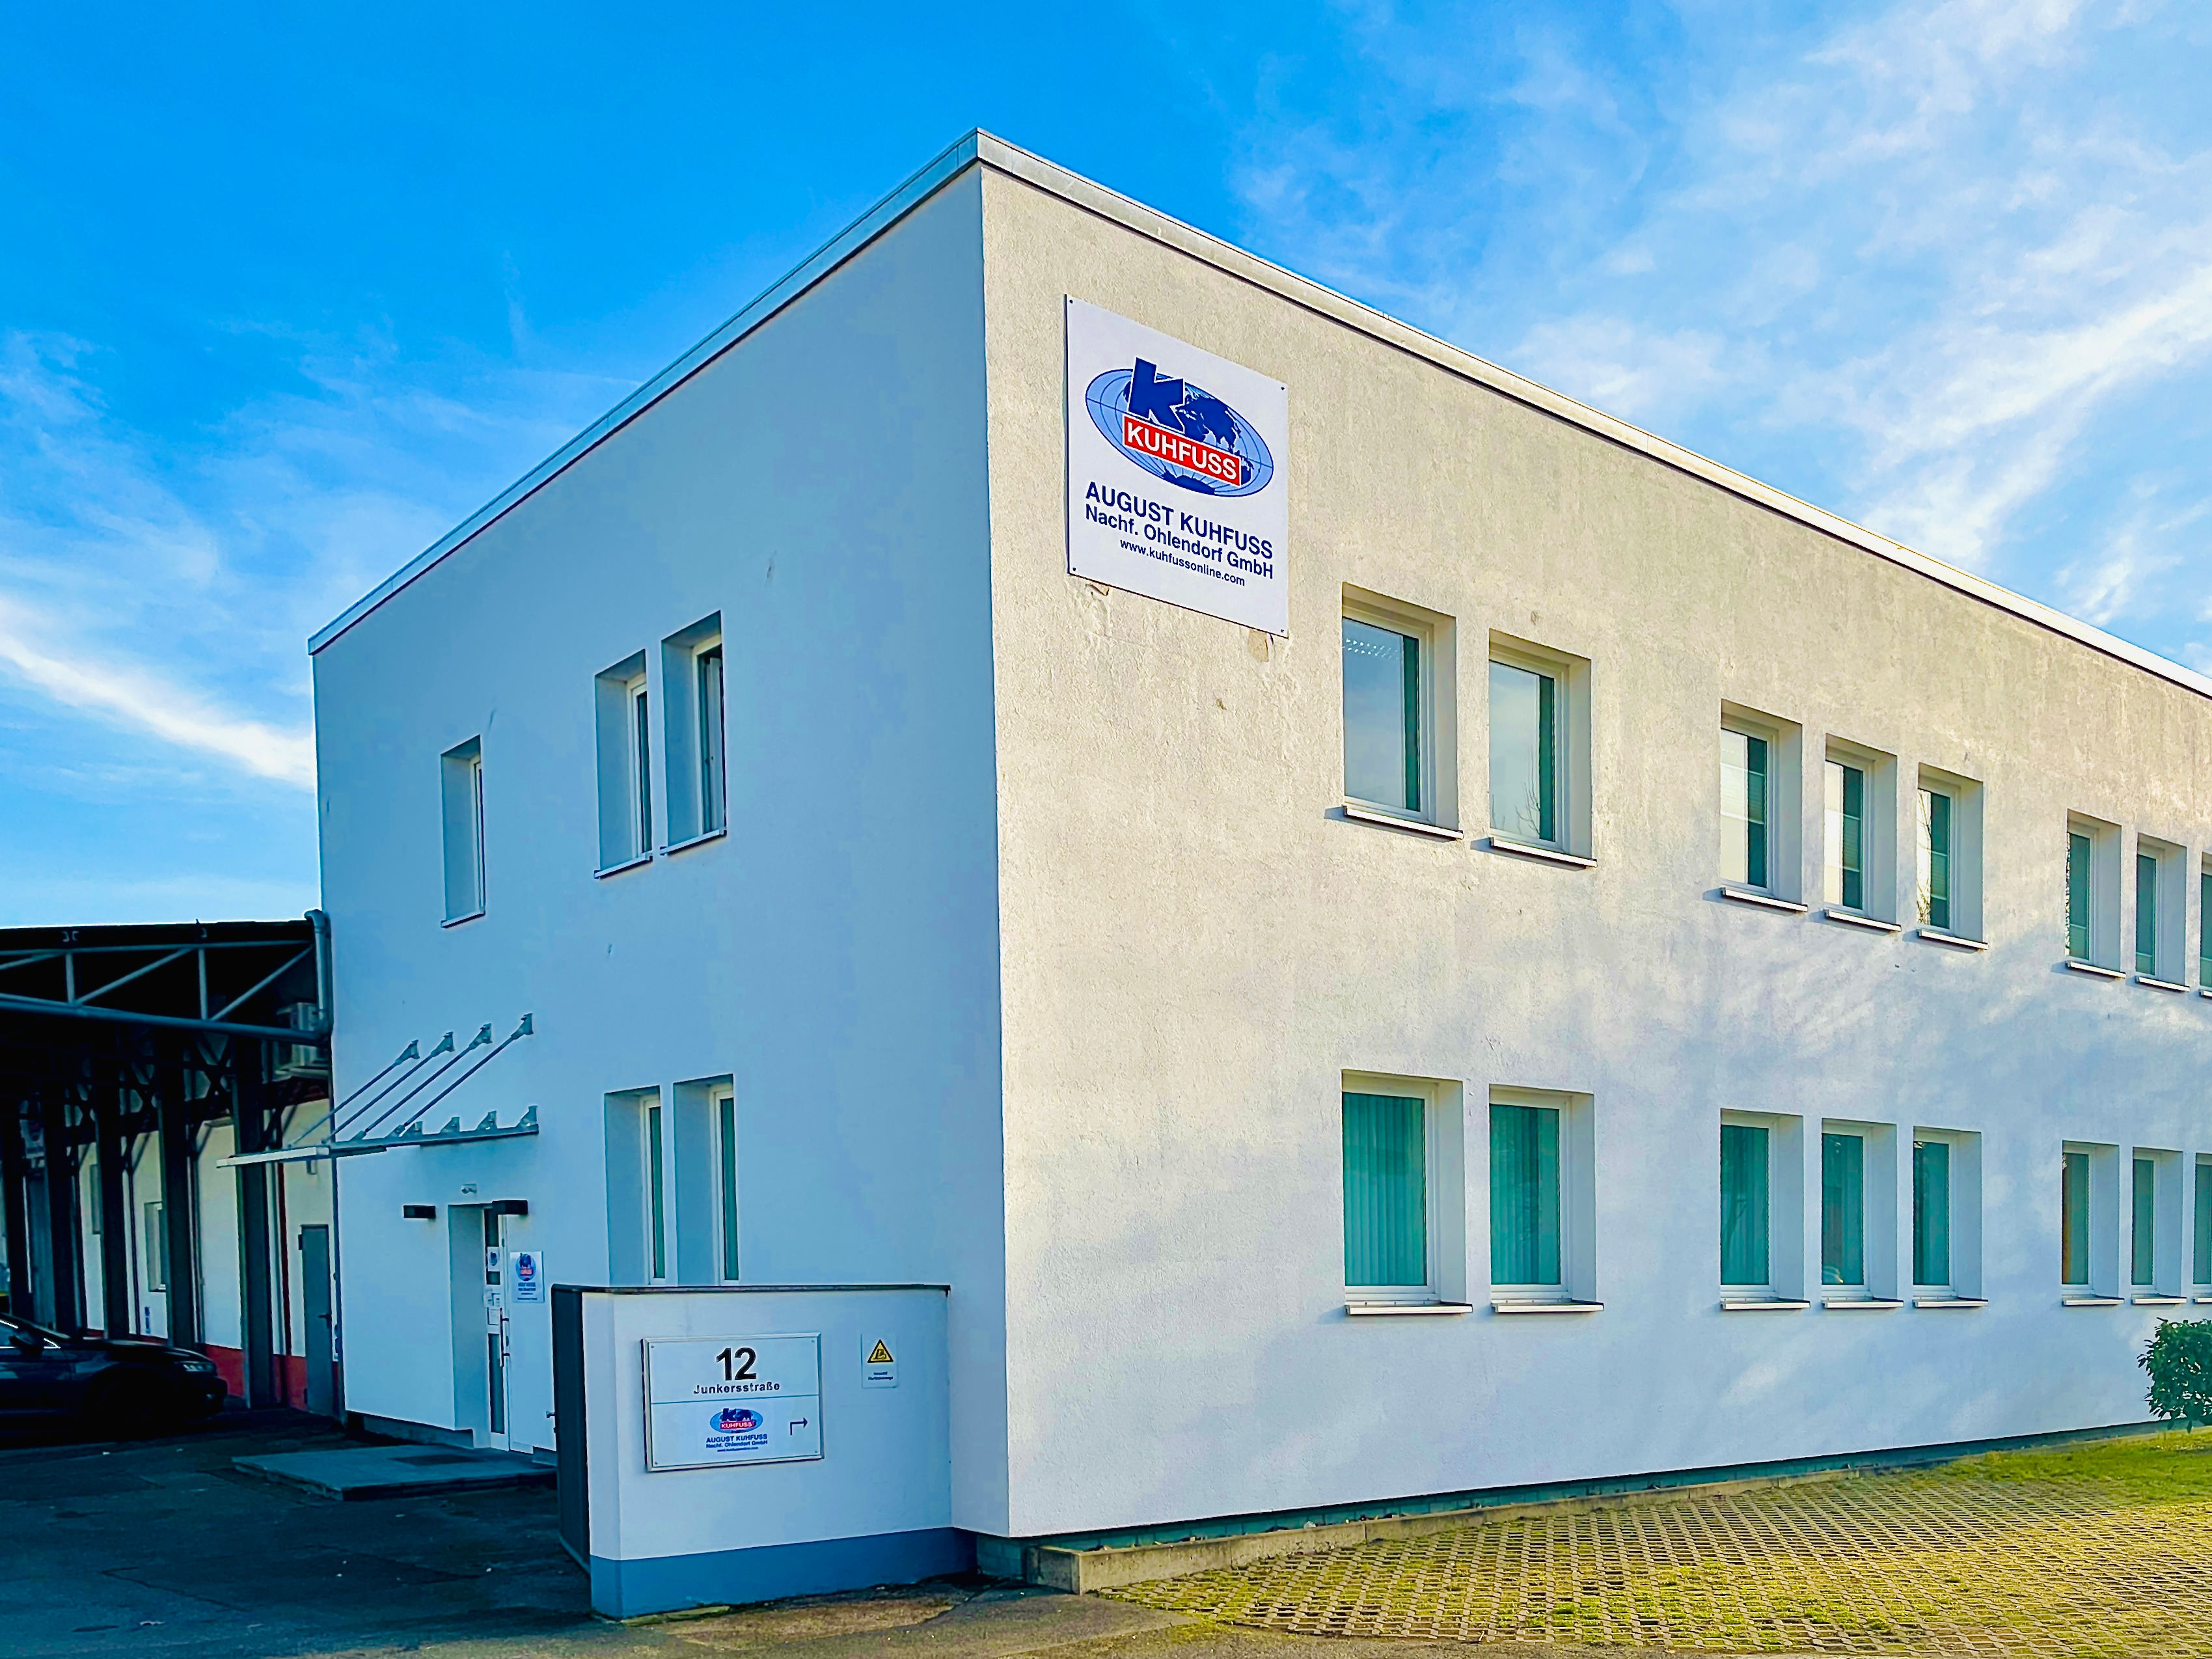 August Kuhfuss Nachf. Ohlendorf GmbH Hannover, Junkersstraße 12 in Hannover